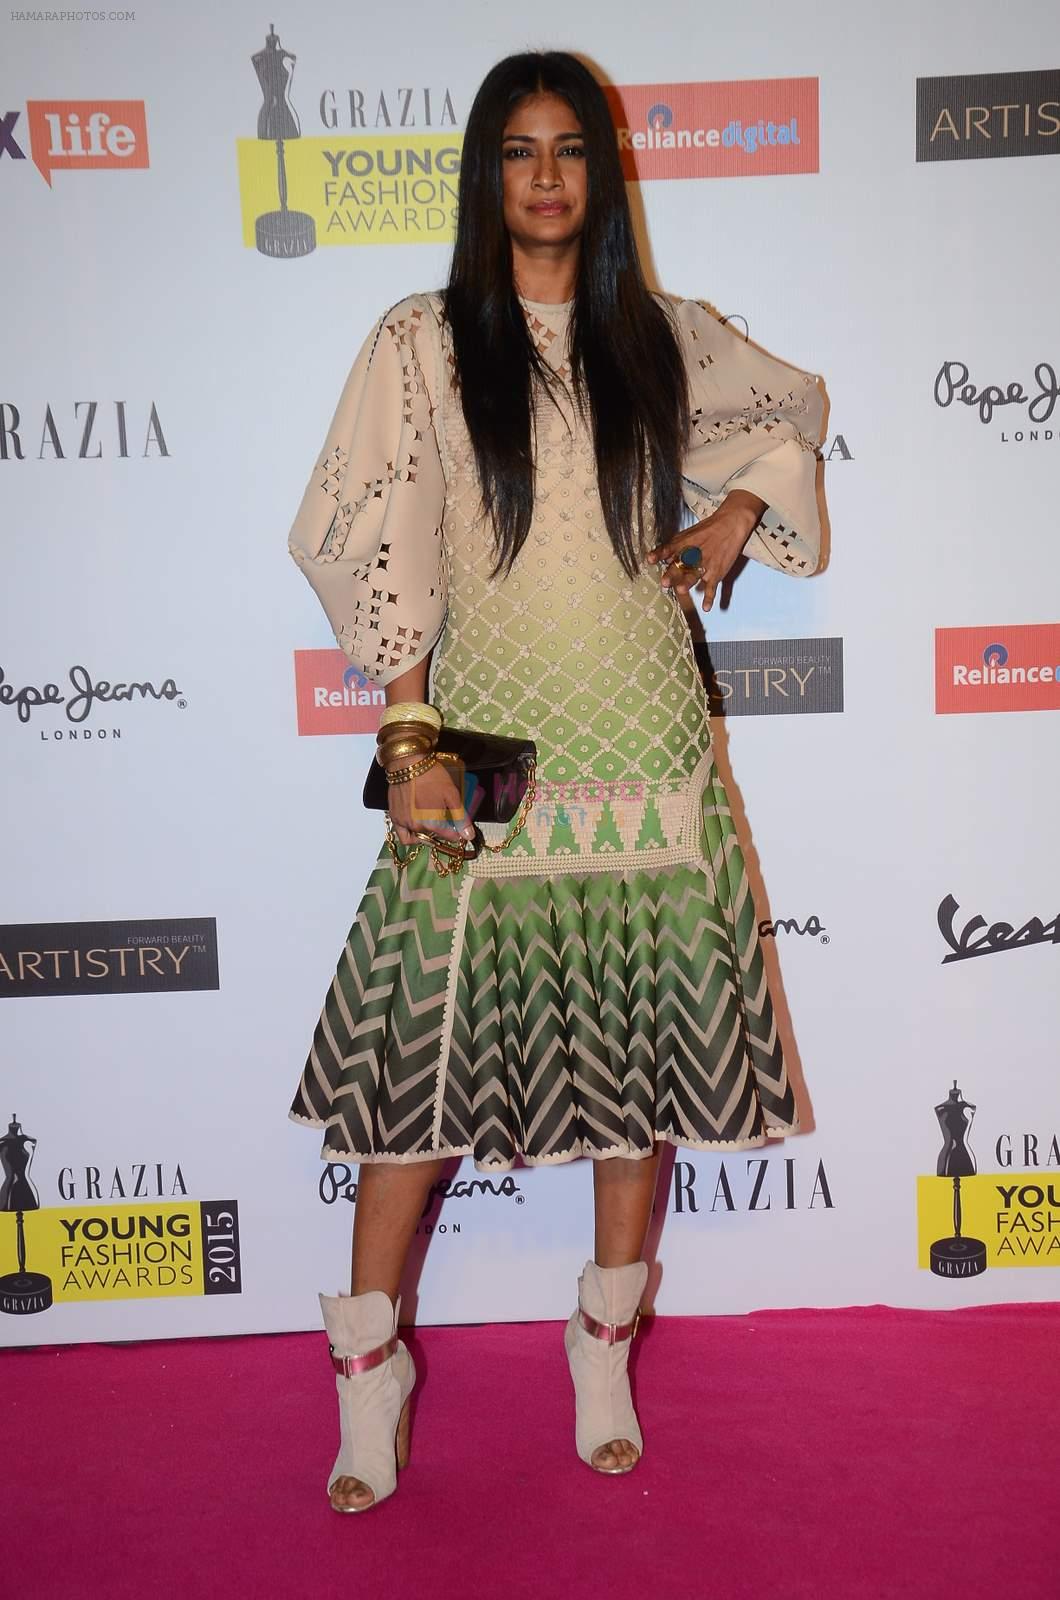 Carol Gracias at Grazia young fashion awards red carpet in Leela Hotel on 15th April 2015